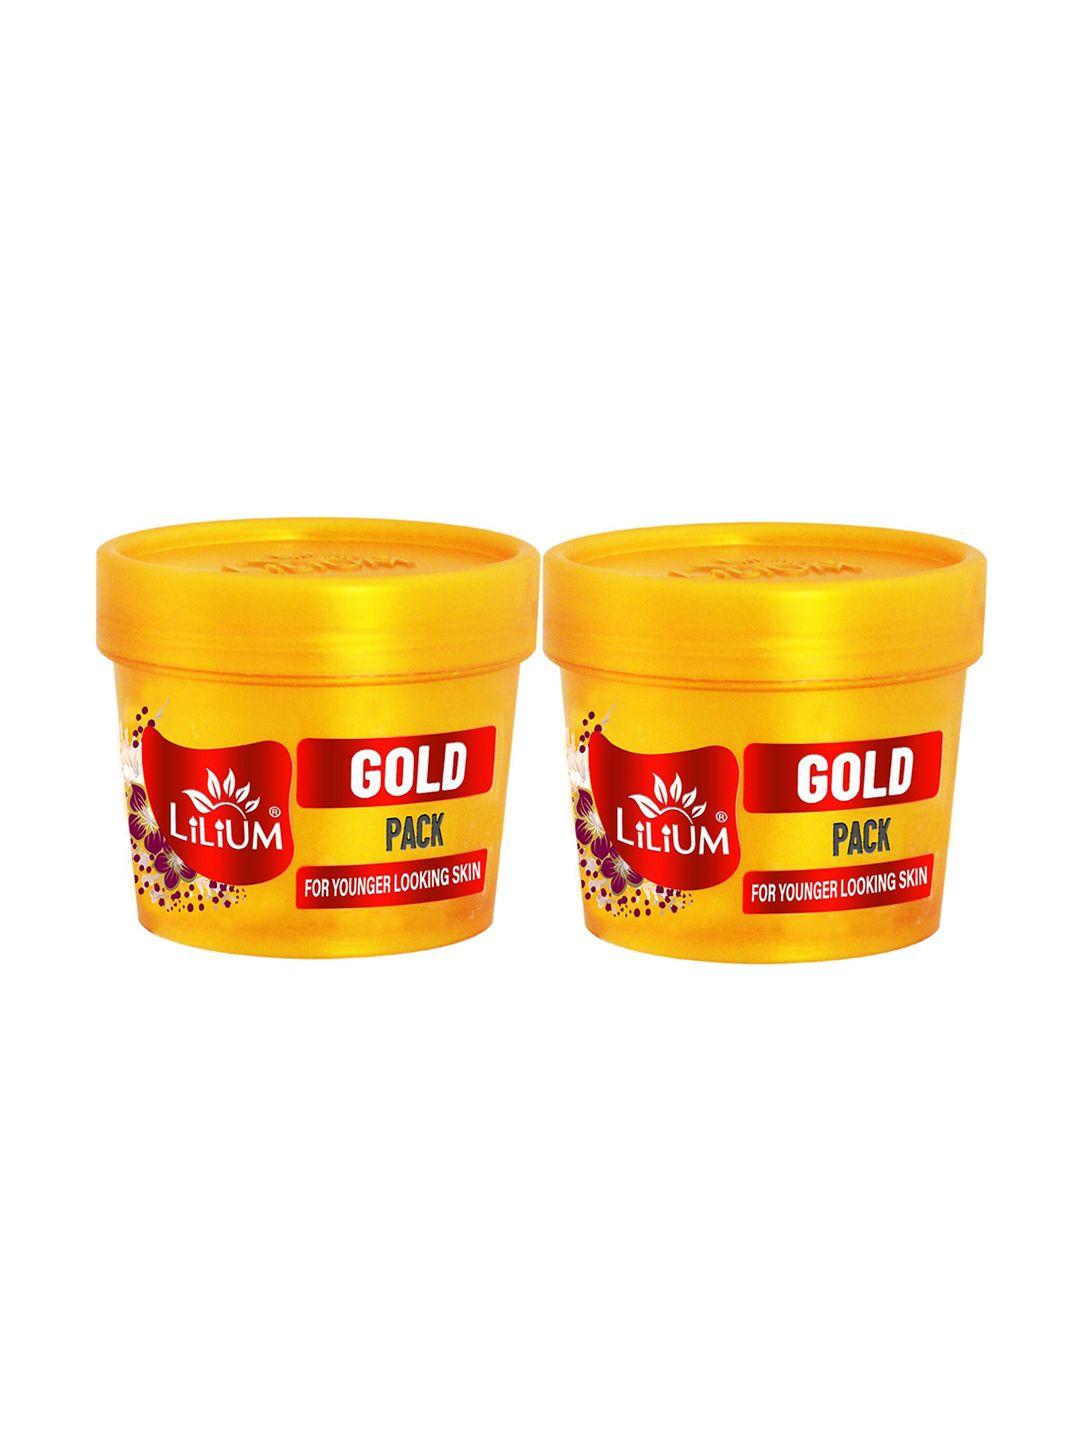 lilium set of 2 gold face mask for younger looking skin - 100g each